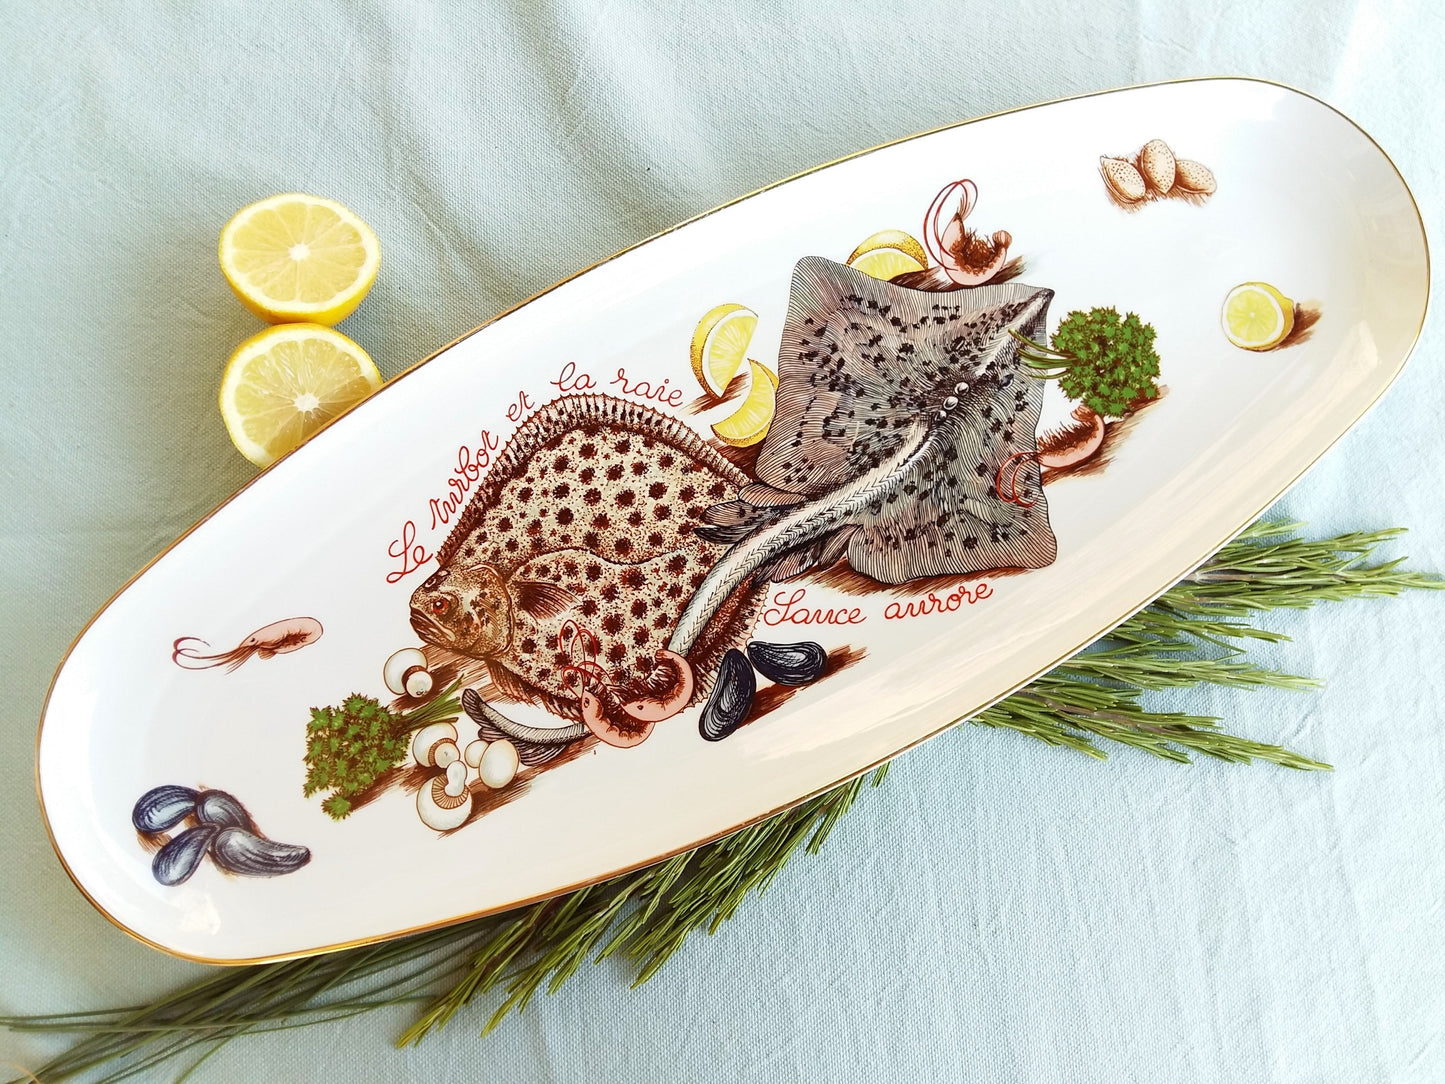 Extra Long, Paris Porcelain, Oval, Turbot and Skate Fish Banquet Table Centrepiece. from Tiggy & Pip - €175.00! Shop now at Tiggy and Pip